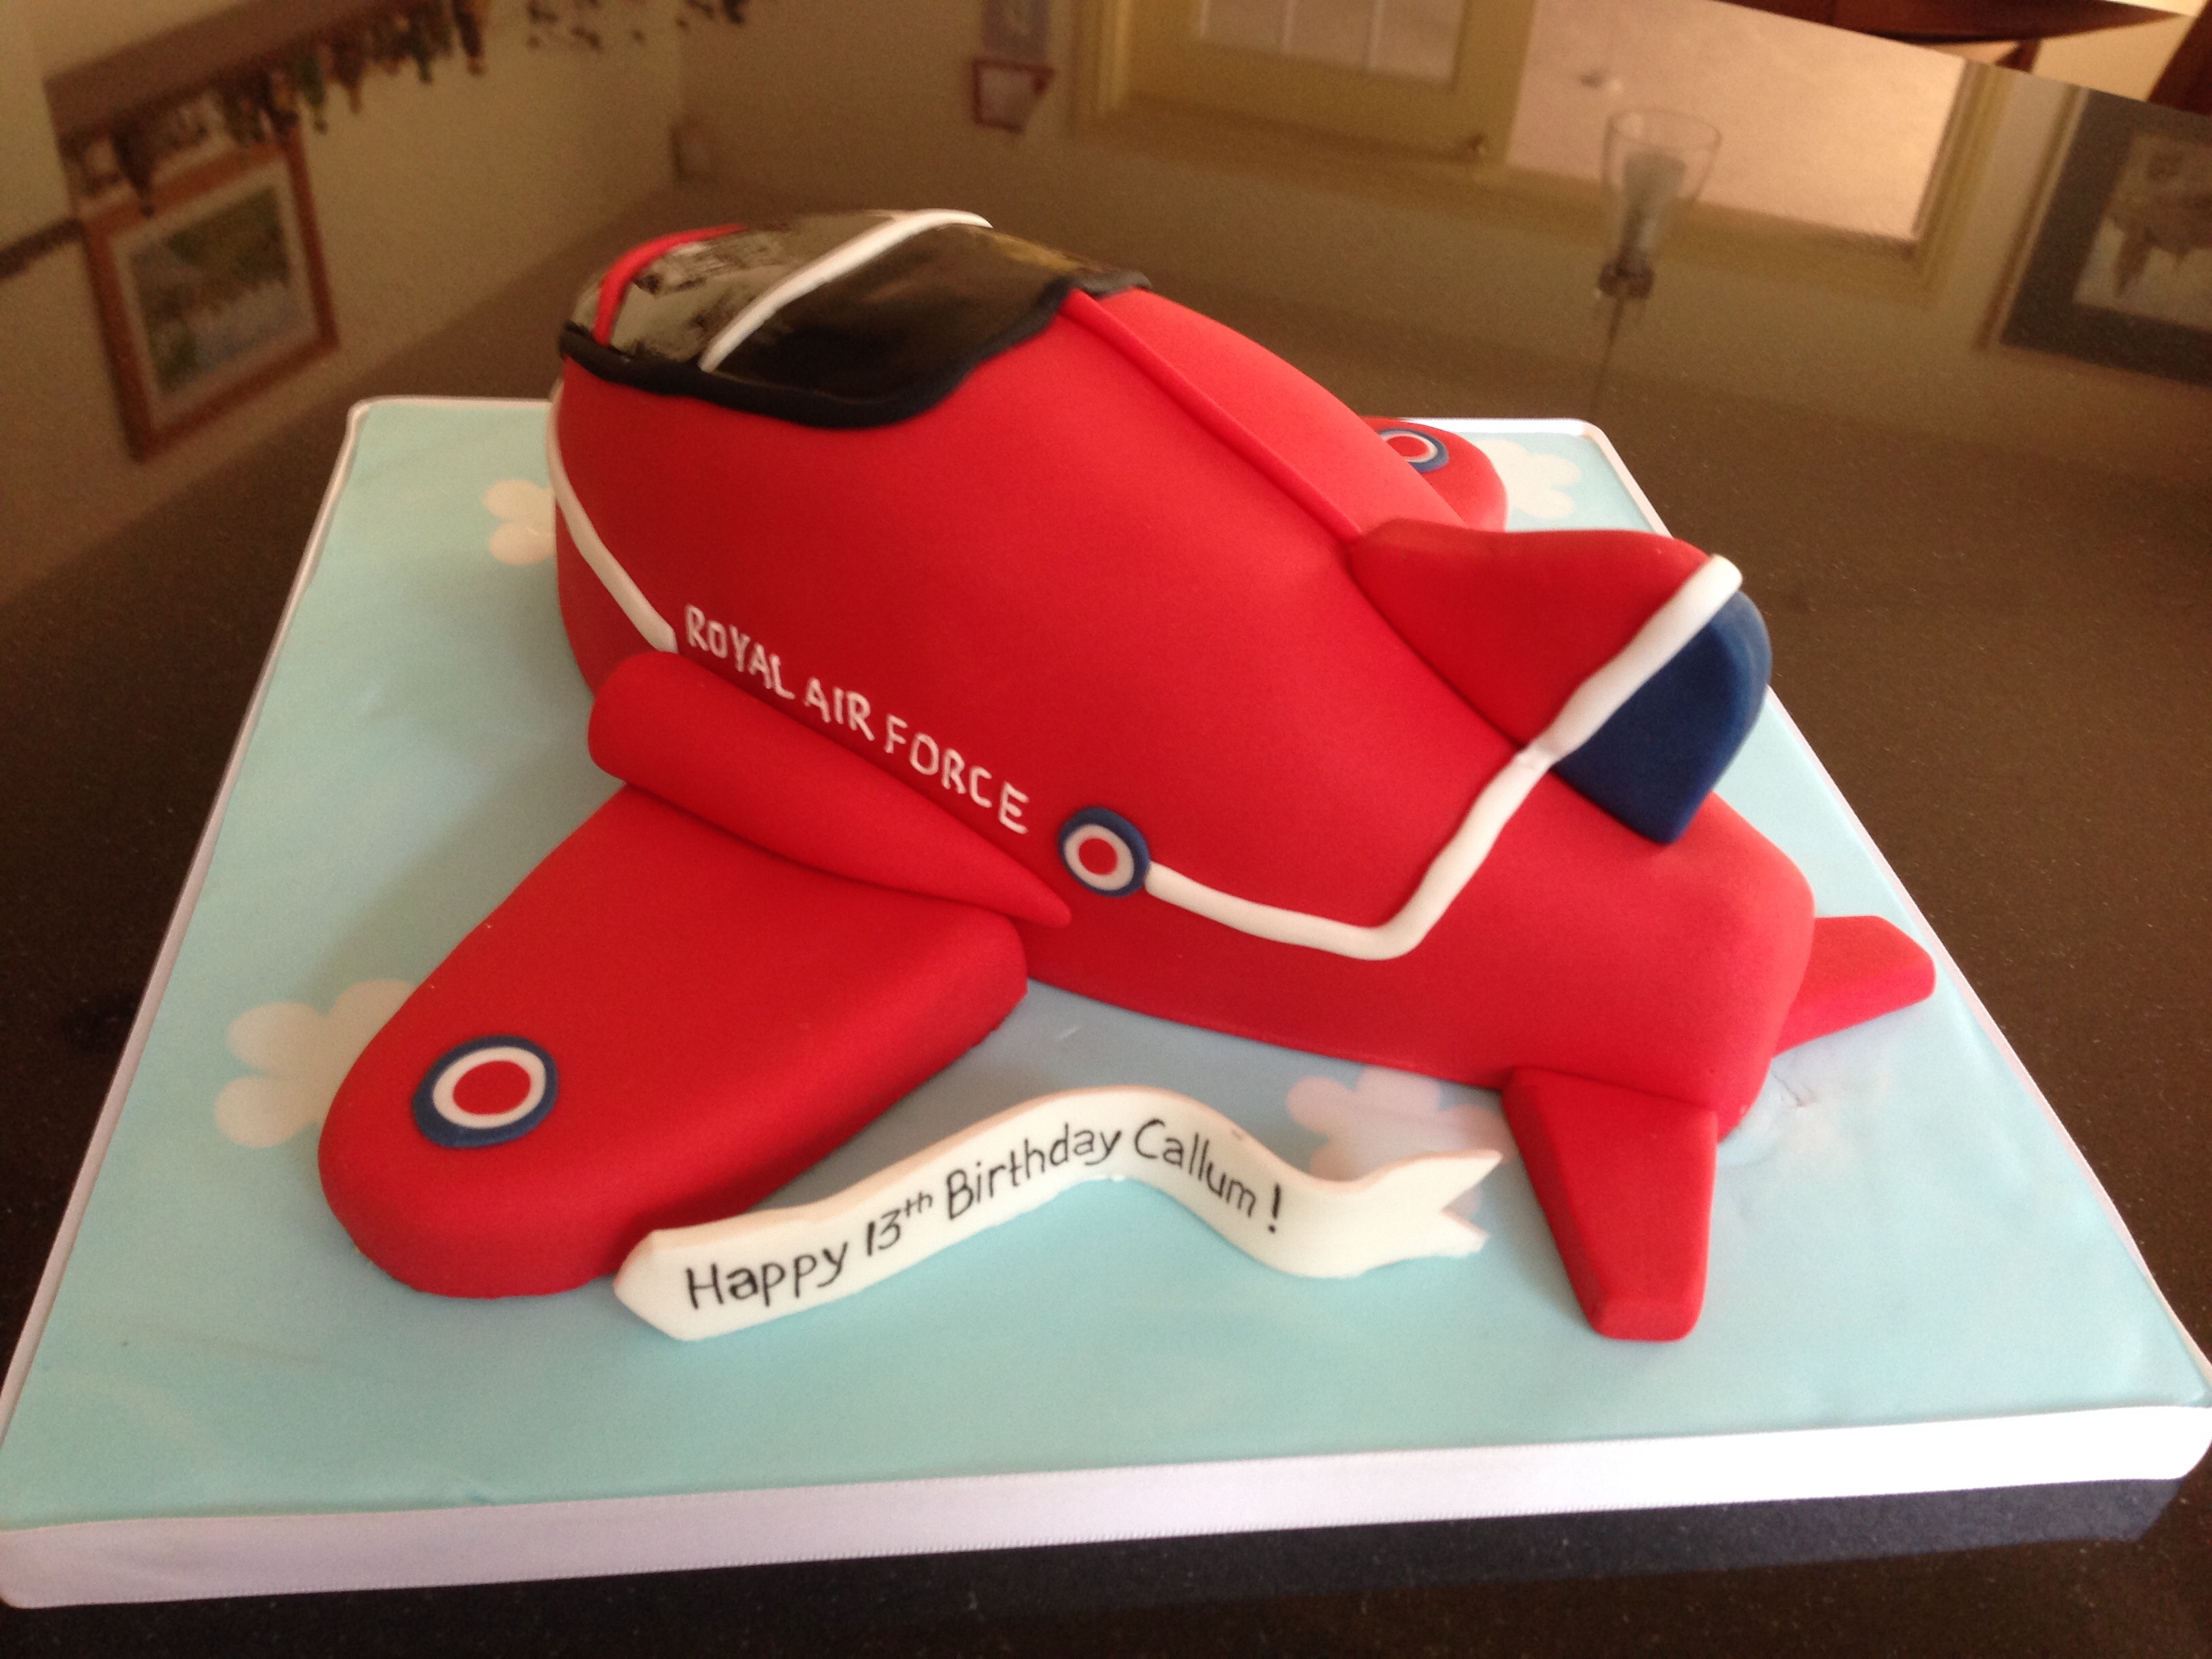 Red Arrows cake